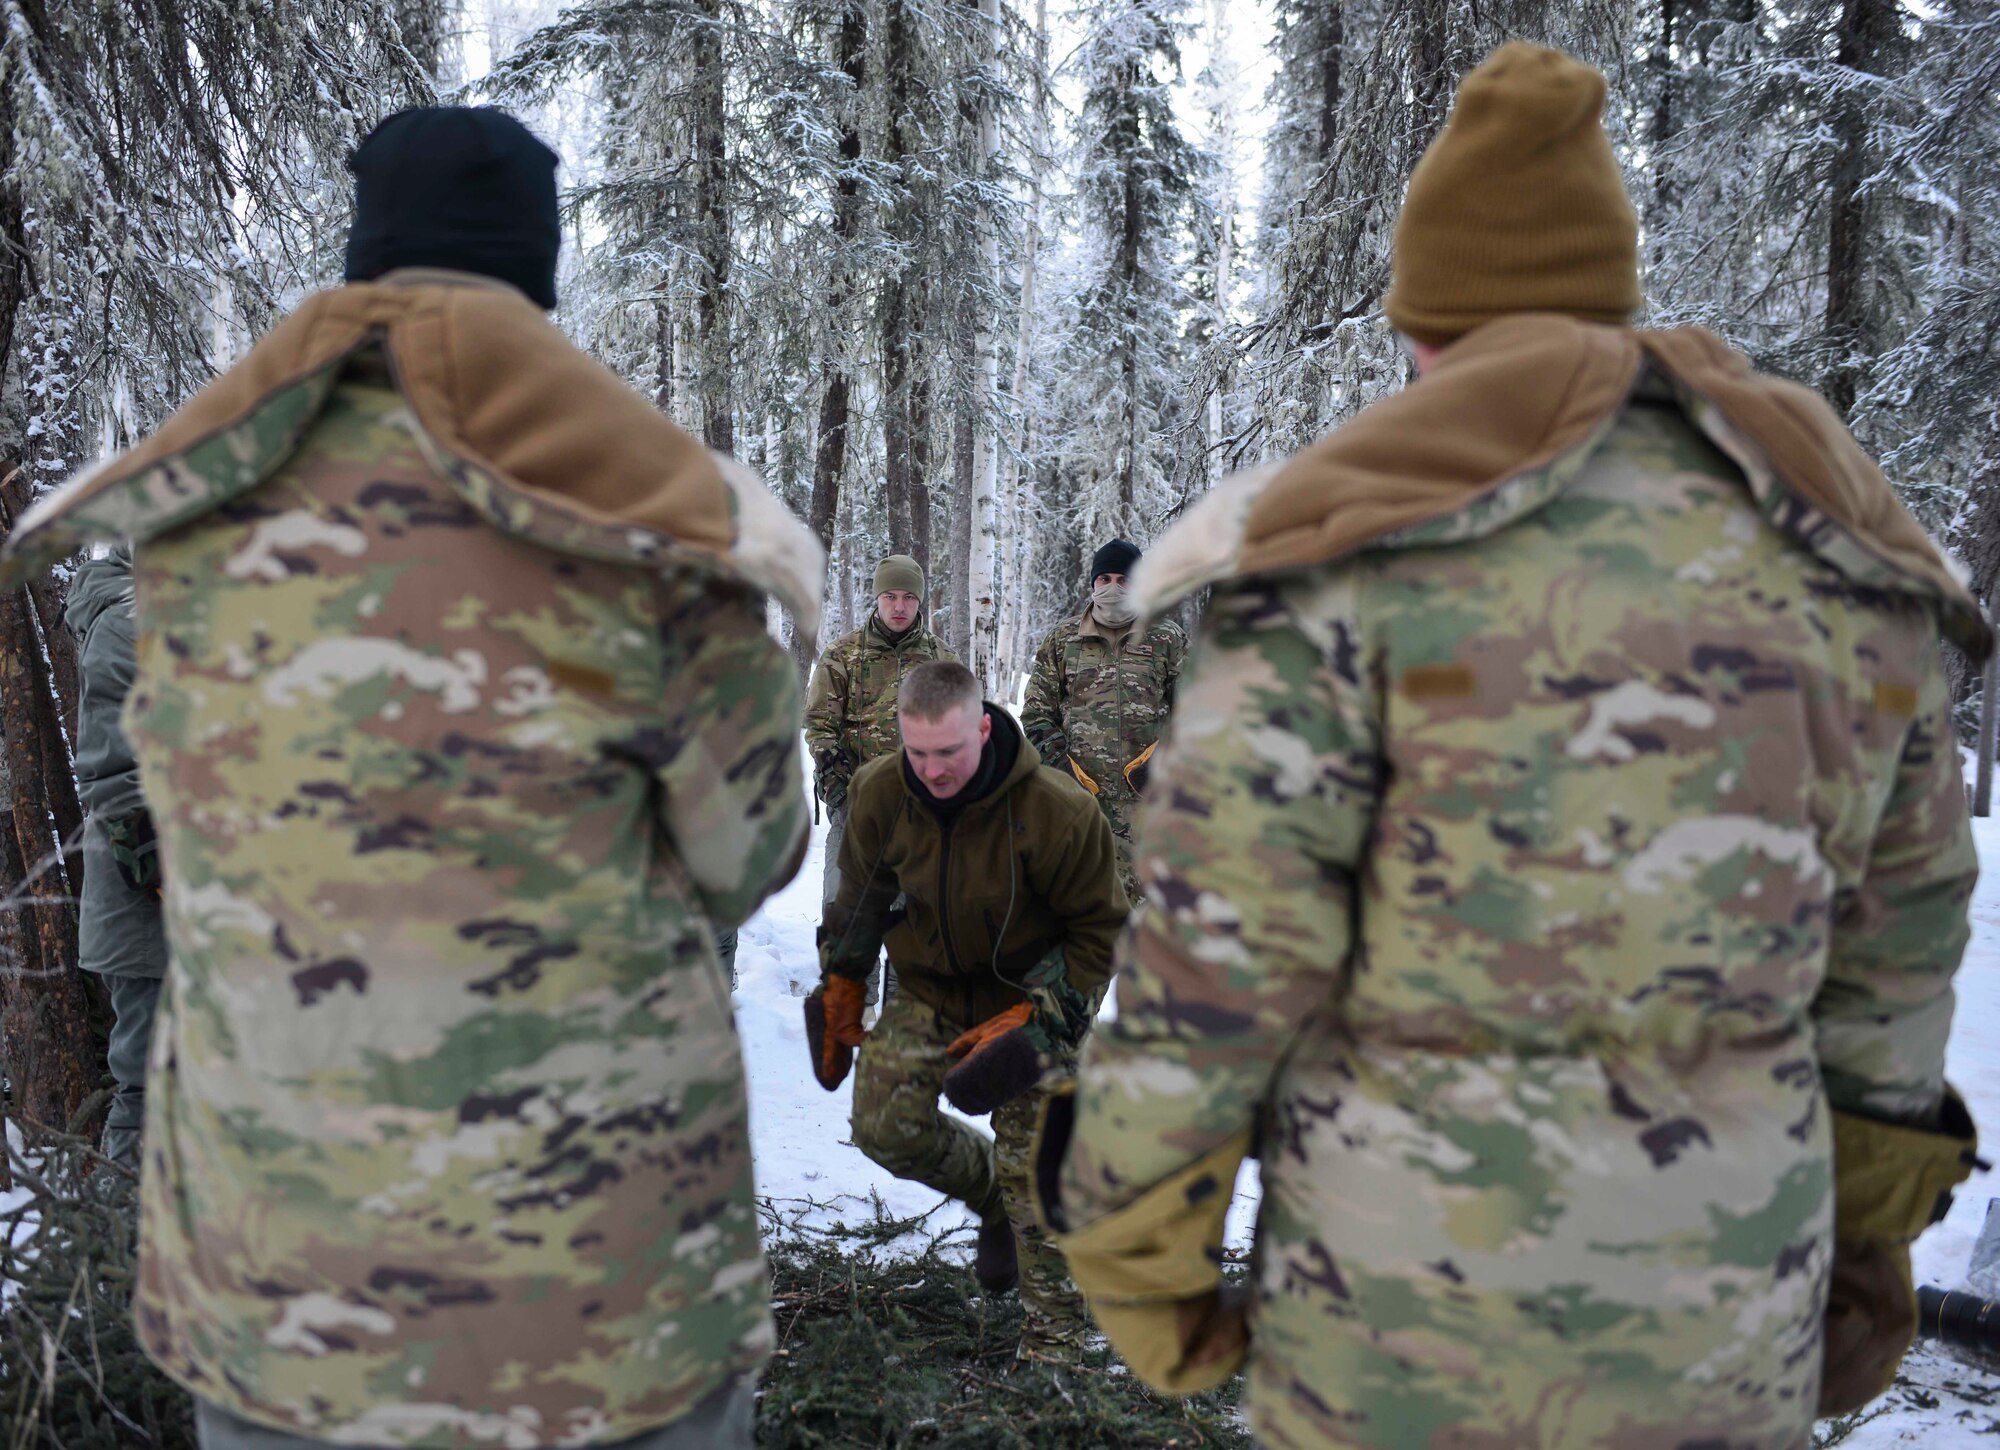 U.S. Air Force Staff Sgt. Samuel Ley, a Survival, Evasion, Resistance and Escape specialist assigned to the Arctic Survival Training School, demonstrates how to set up a thermalized A-frame survival shelter on Eielson Air Force Base, Alaska, Jan. 27, 2021.